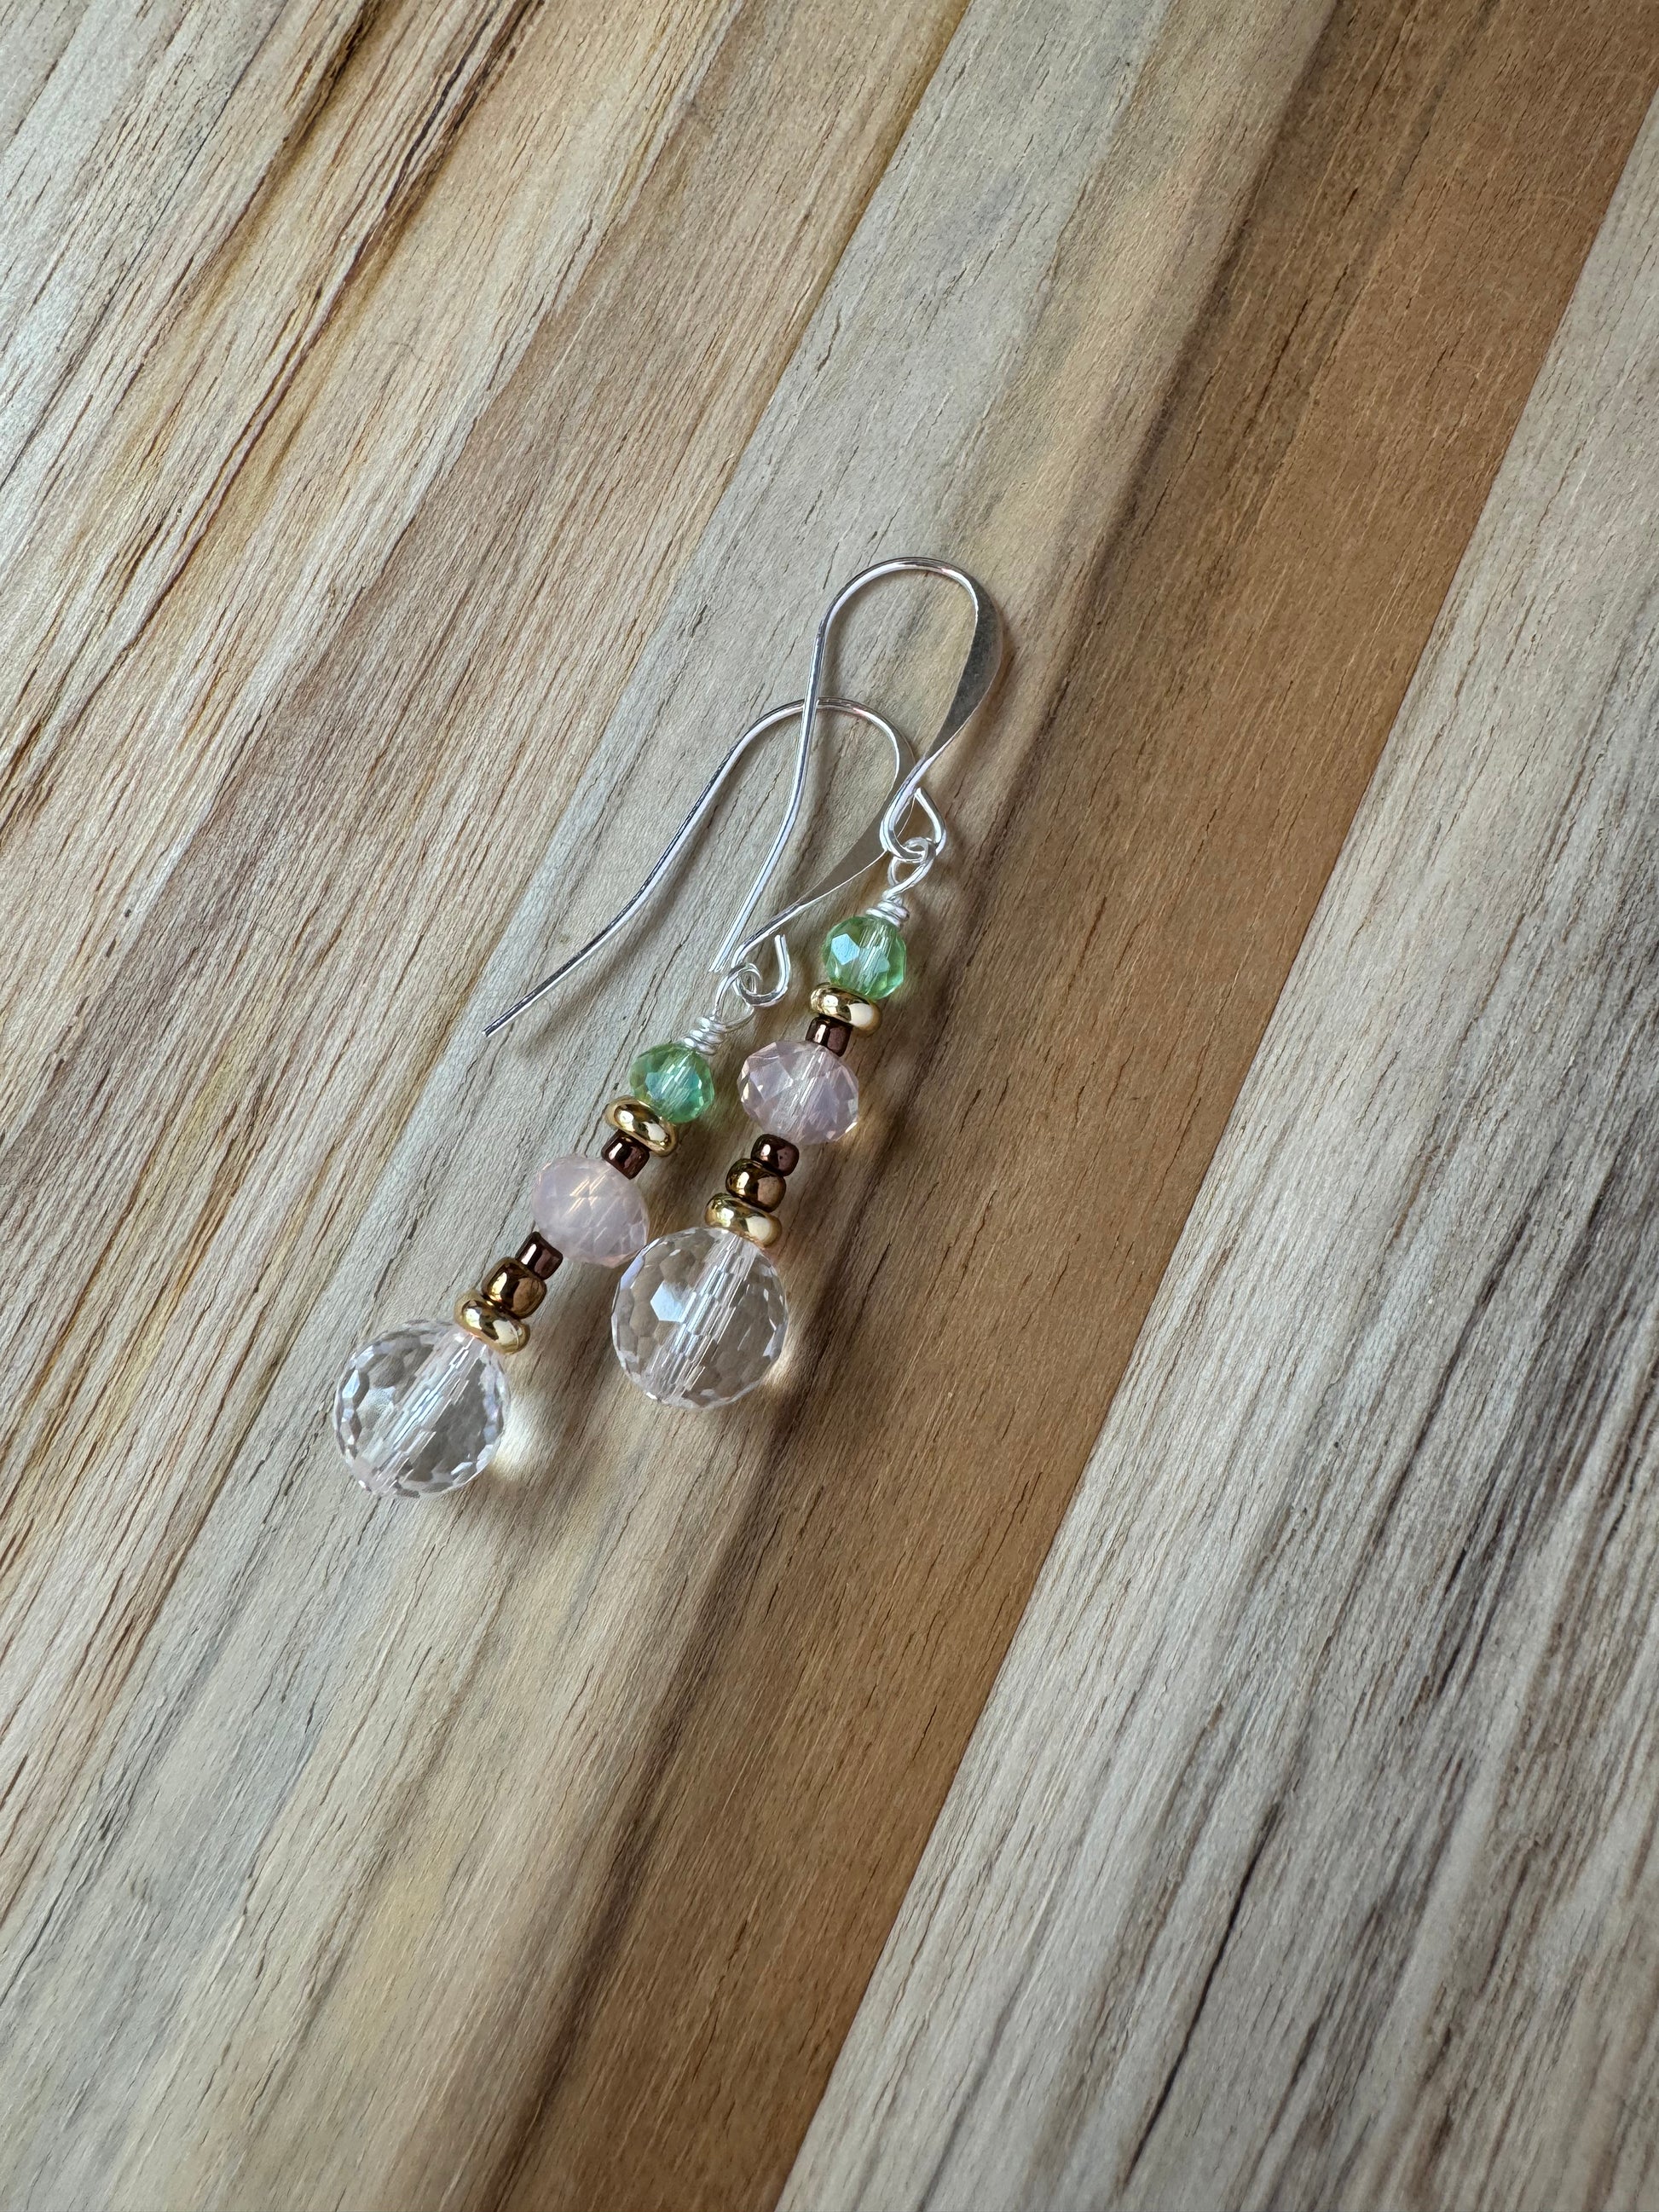 Faceted Clear Crystal Quartz Silver Plated Dangle Earrings with Pink and Green Crystal Glass Beads - My Urban Gems